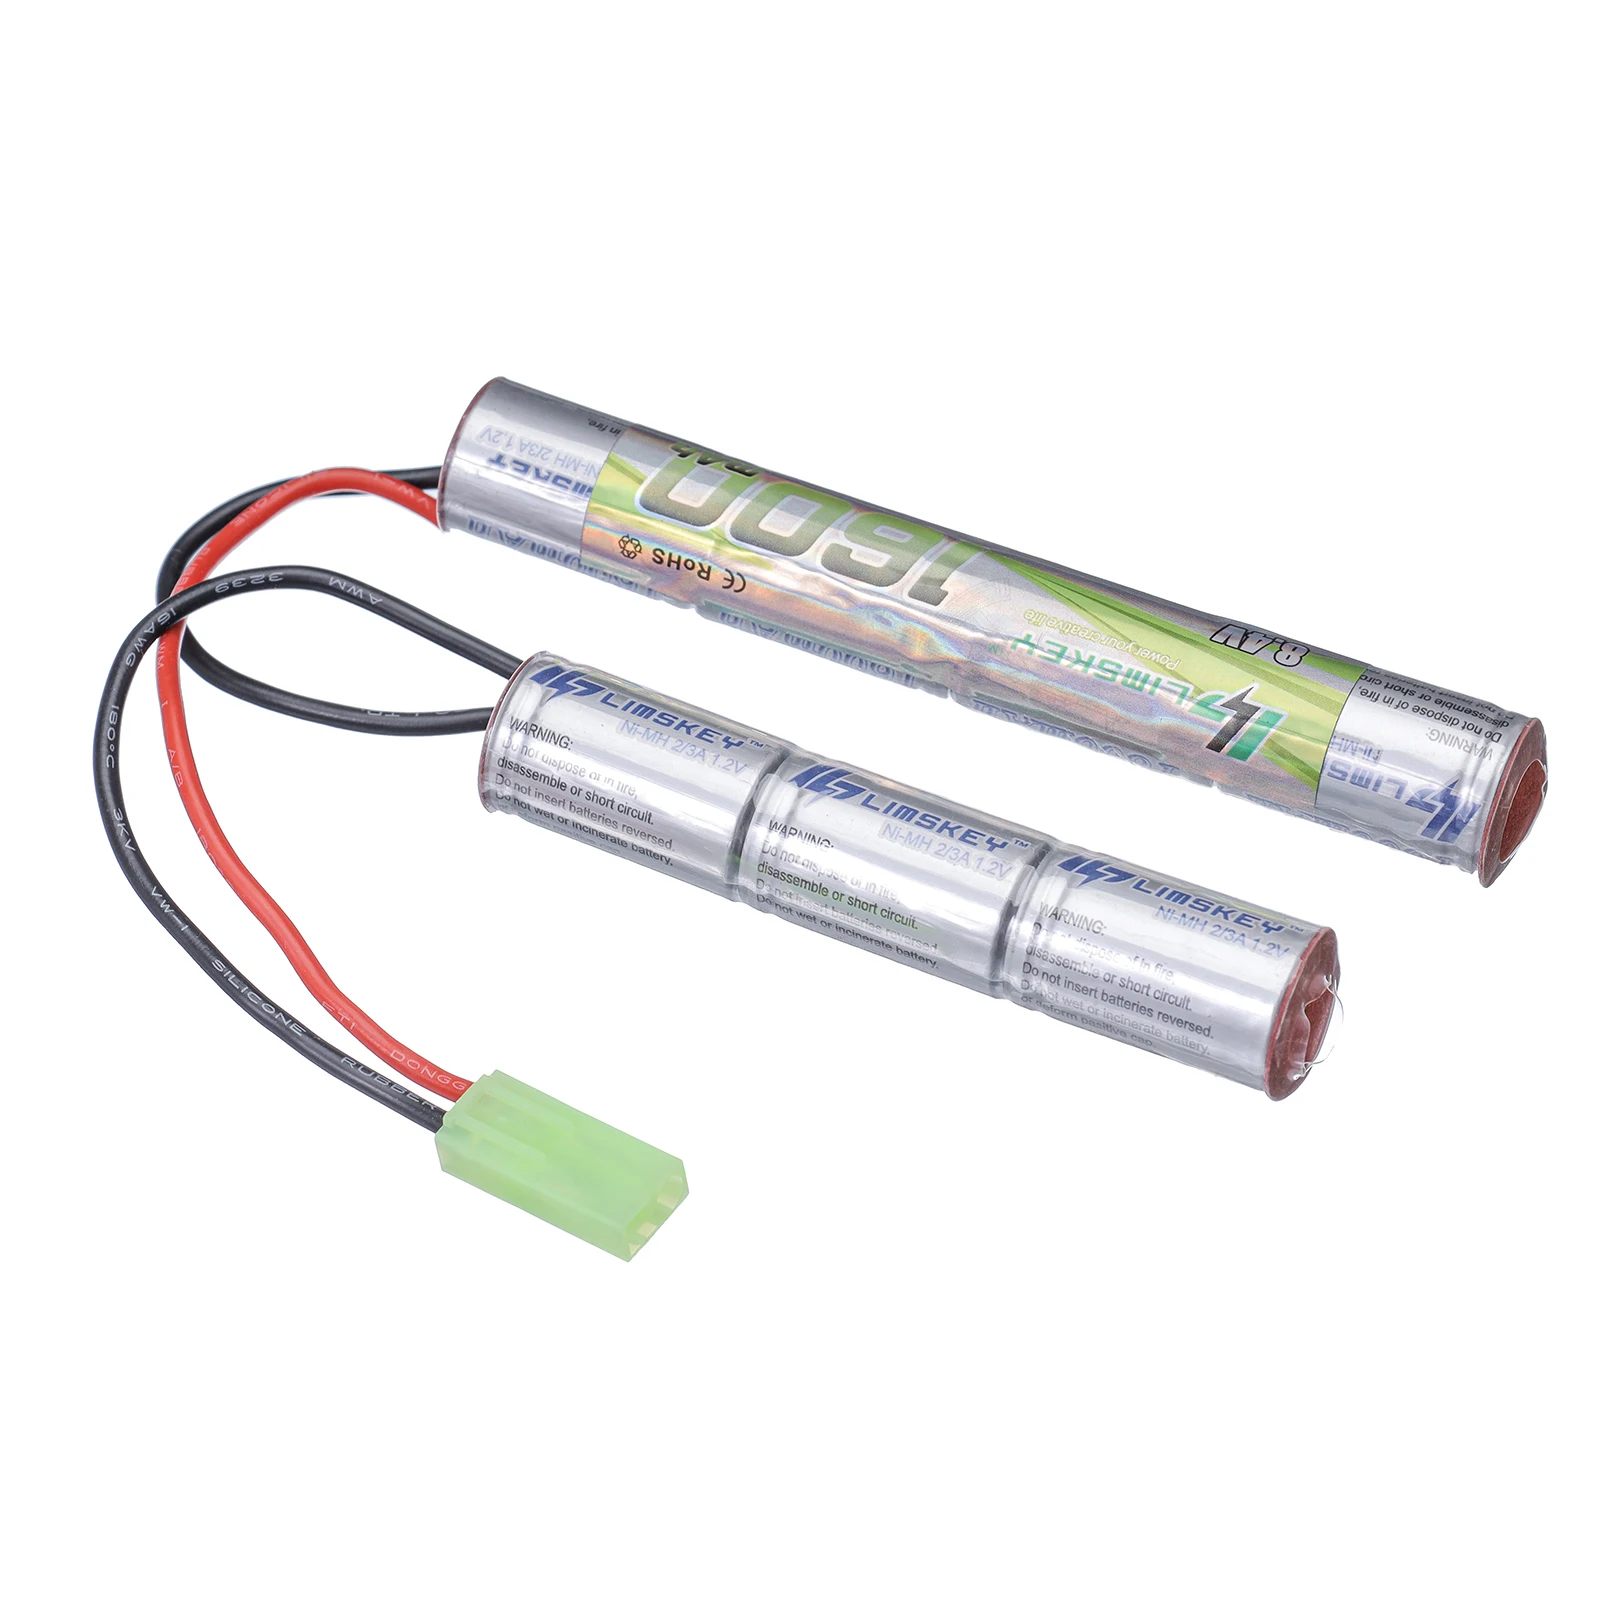 

Limskey 2/3A 8.4v 1600mAh Butterfly Nunchuck NIMH Battery Pack with Mini Tamiya Connector for Airsoft Guns M110, SR25, M249, G3